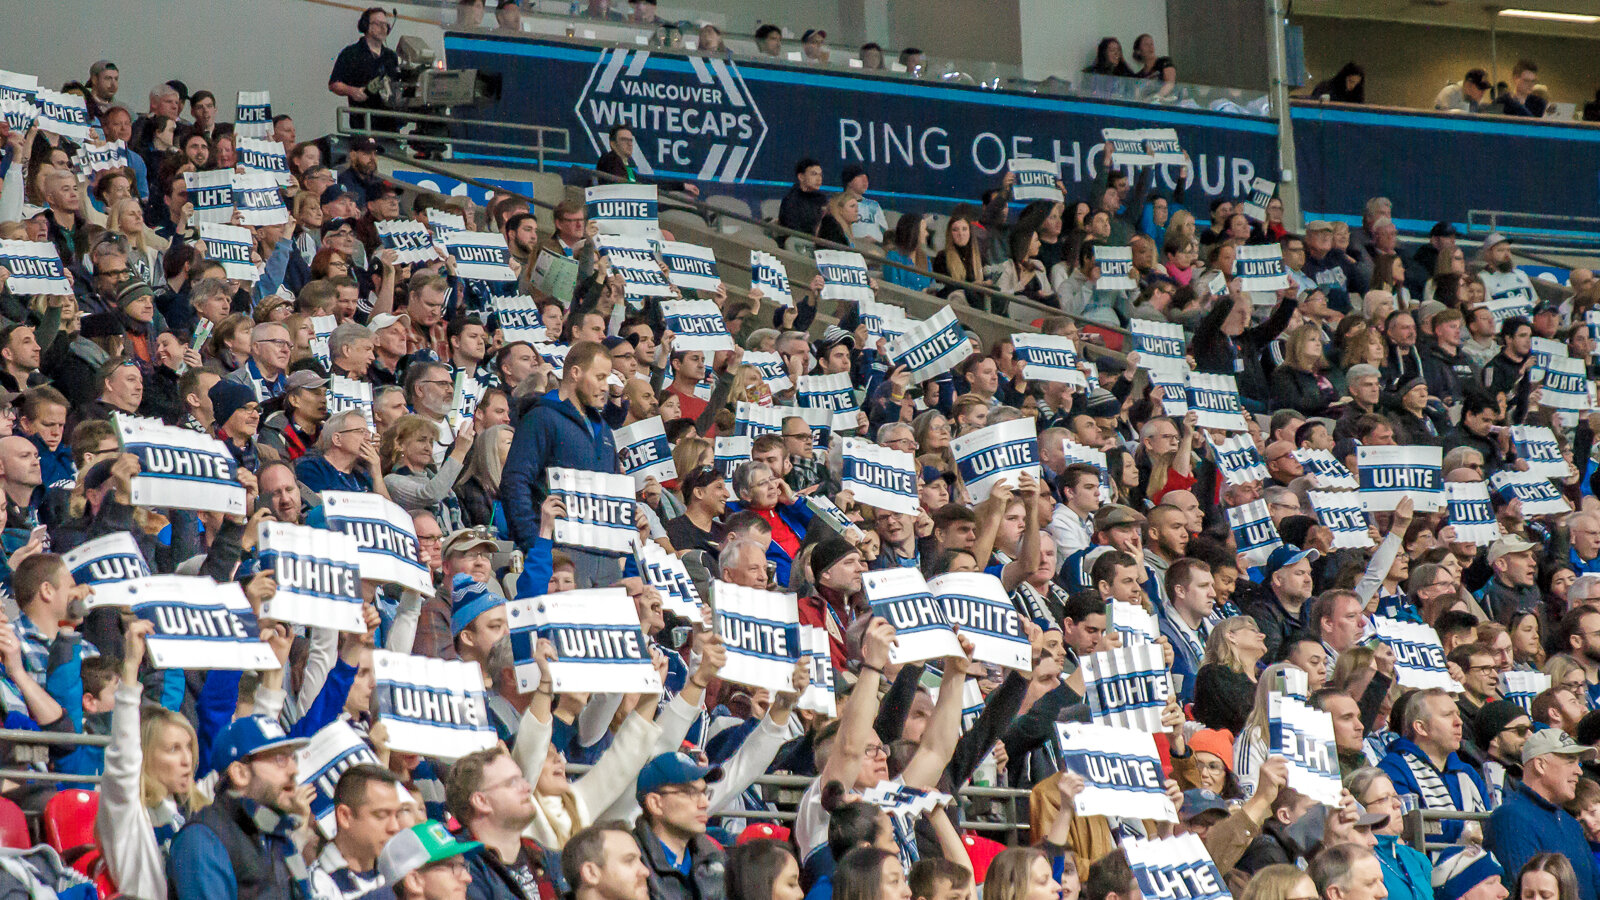 2019-03-02 Vancouver Whitecaps FC Supporters.jpg